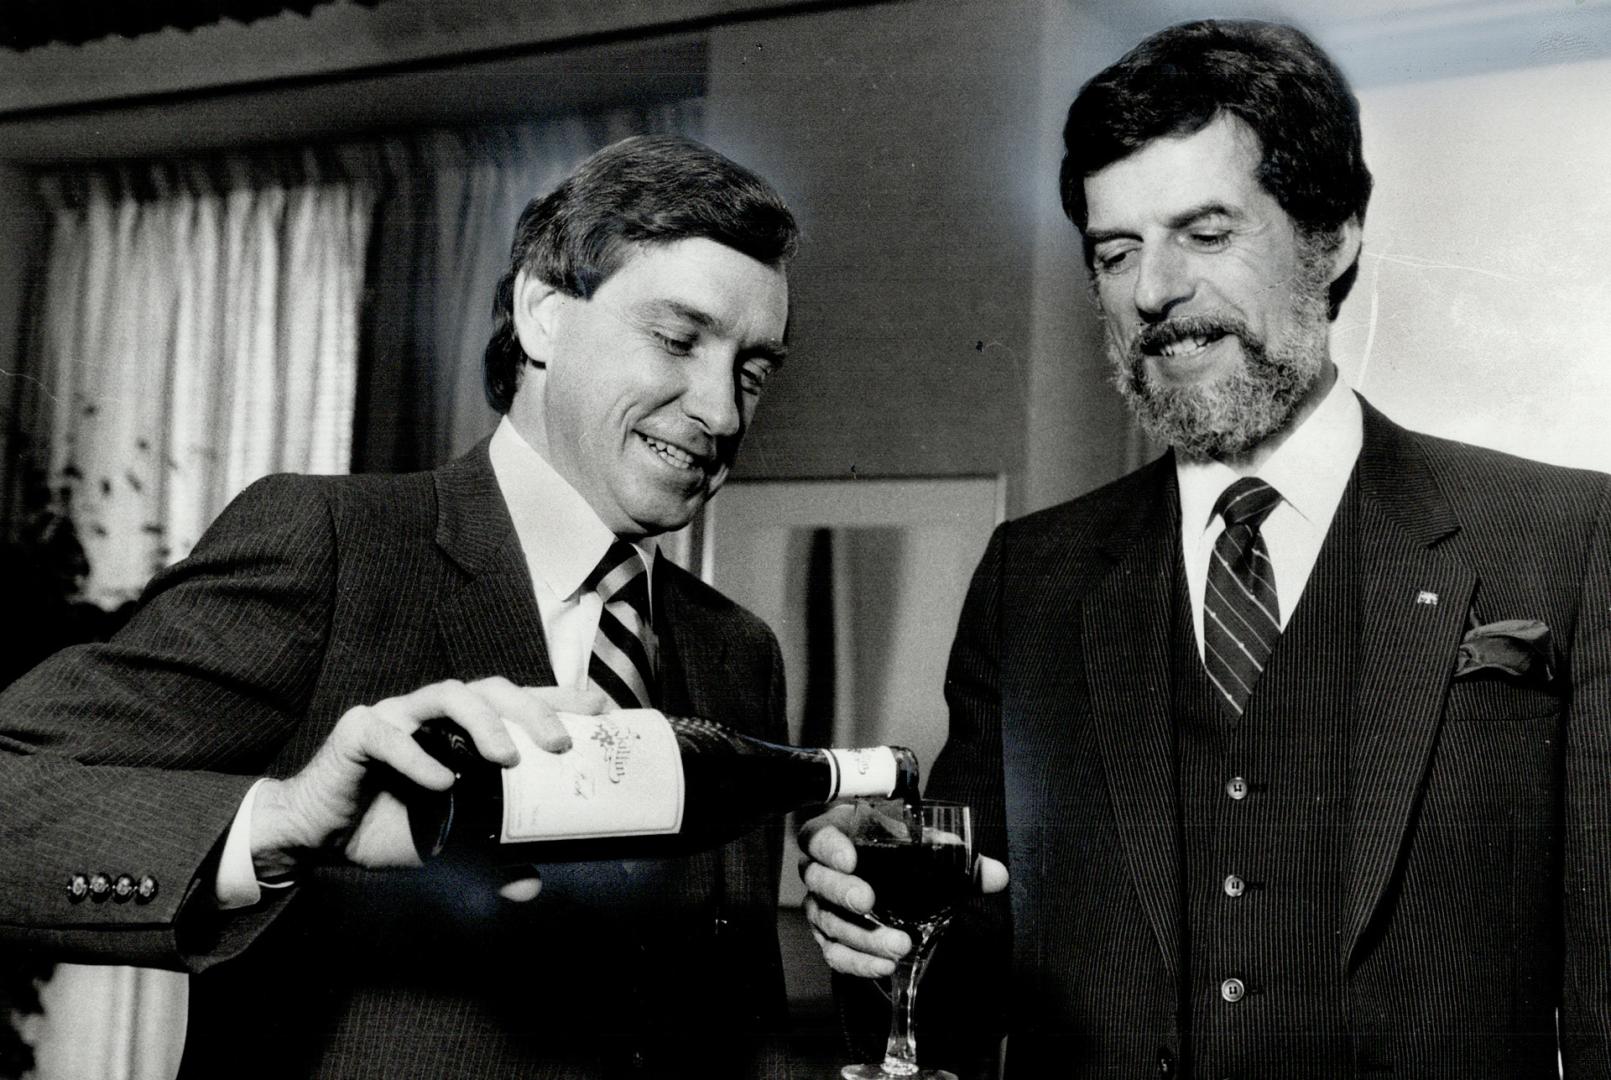 A toast: Ontario Industry Minister Gordon Walker, left, and his Quebec counterpart Rodrigue Biron toast the conclusion of closed-door talks on trade issues yesterday with - what else? - Ontario wine